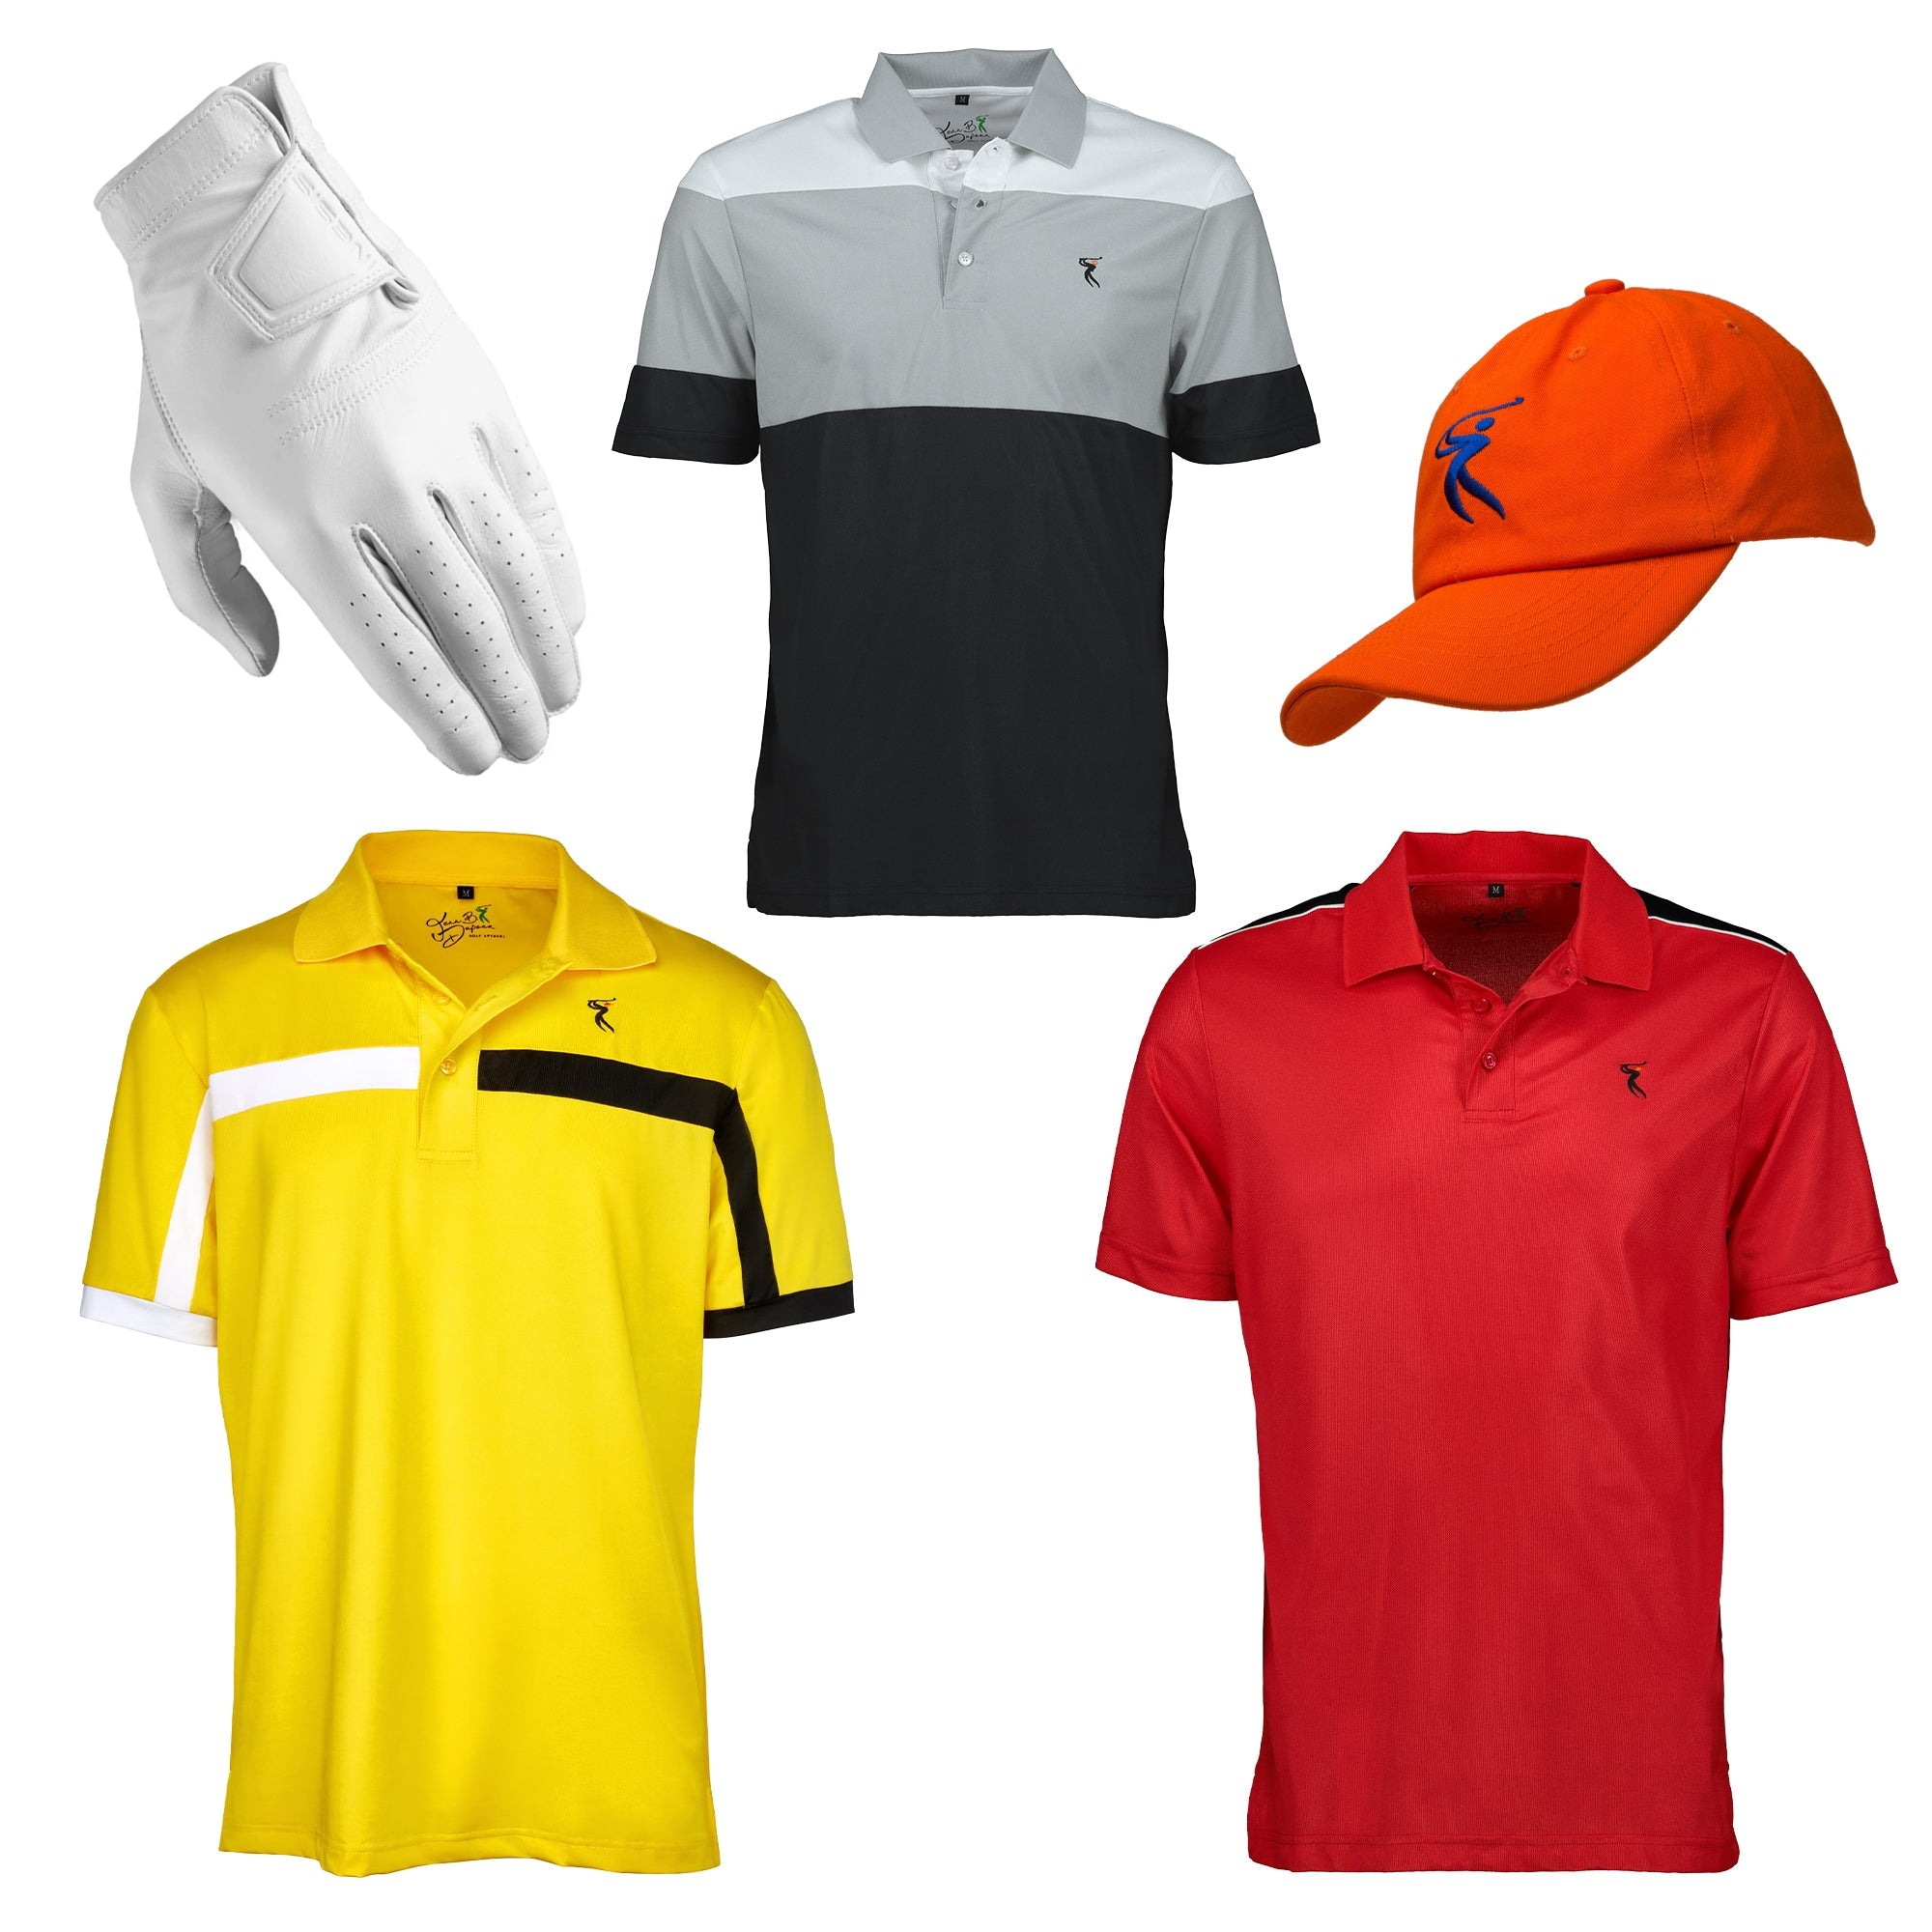 Pack of 3 - MEN'S DRI-FIT GOLF SHIRT COMBO (Get Leather Glove + Hat For FREE !!!)